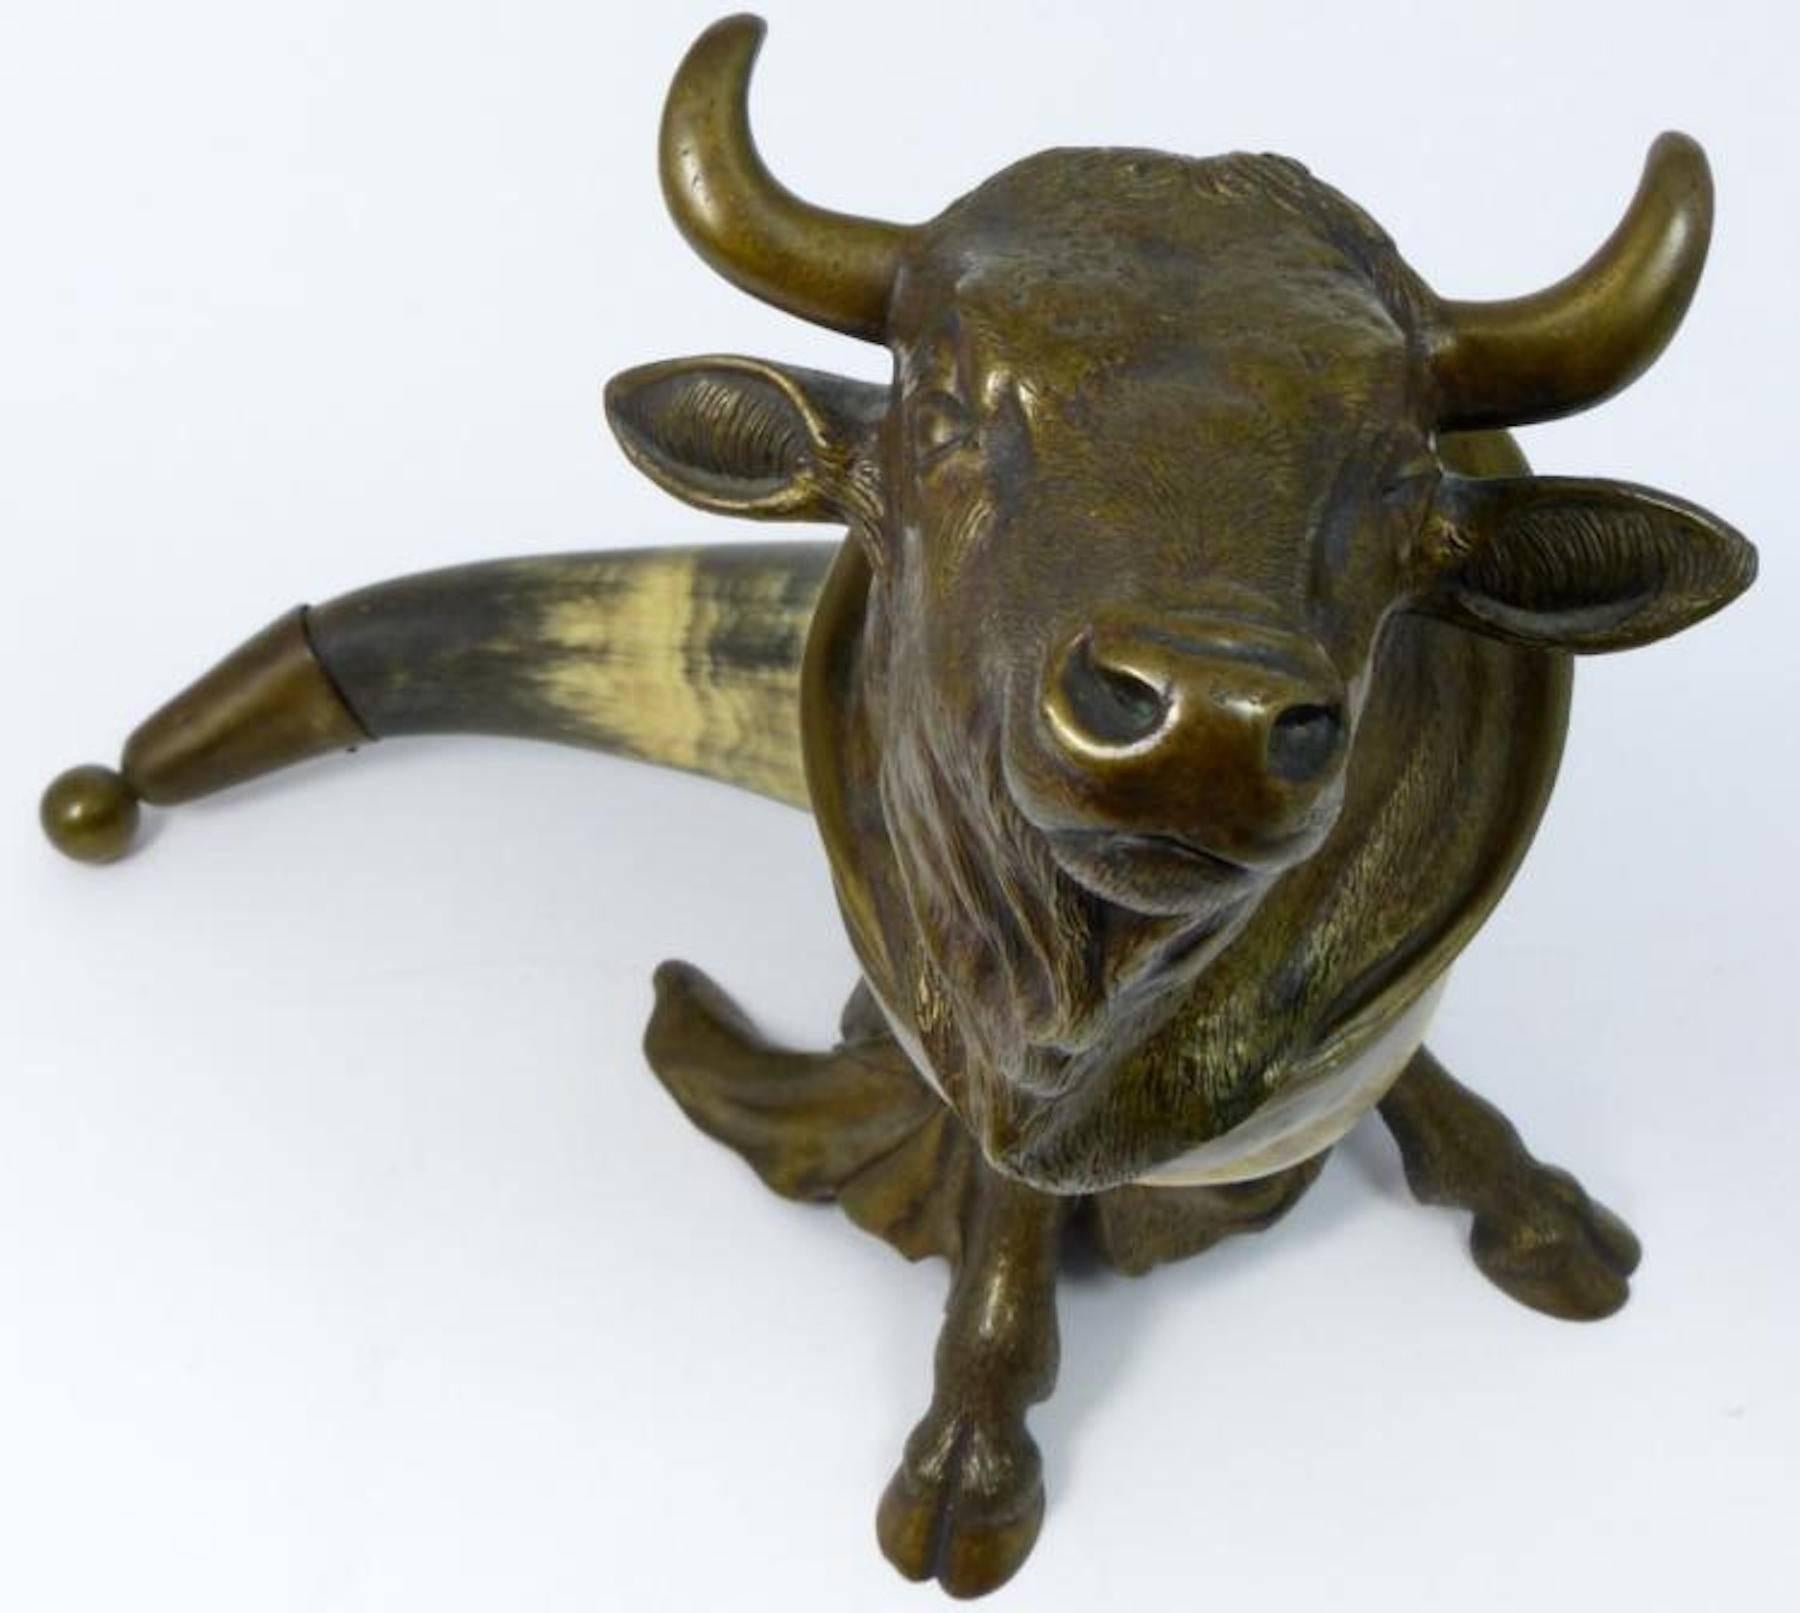 Viennese bronze table snuff mull or inkwell as a bull, realistically modeled and cast,  with a deep olive-brown patina, with natural matte polished bulls horn. An imaginative 19th-century bronze animalier sculpture/desk accessory for someone who has